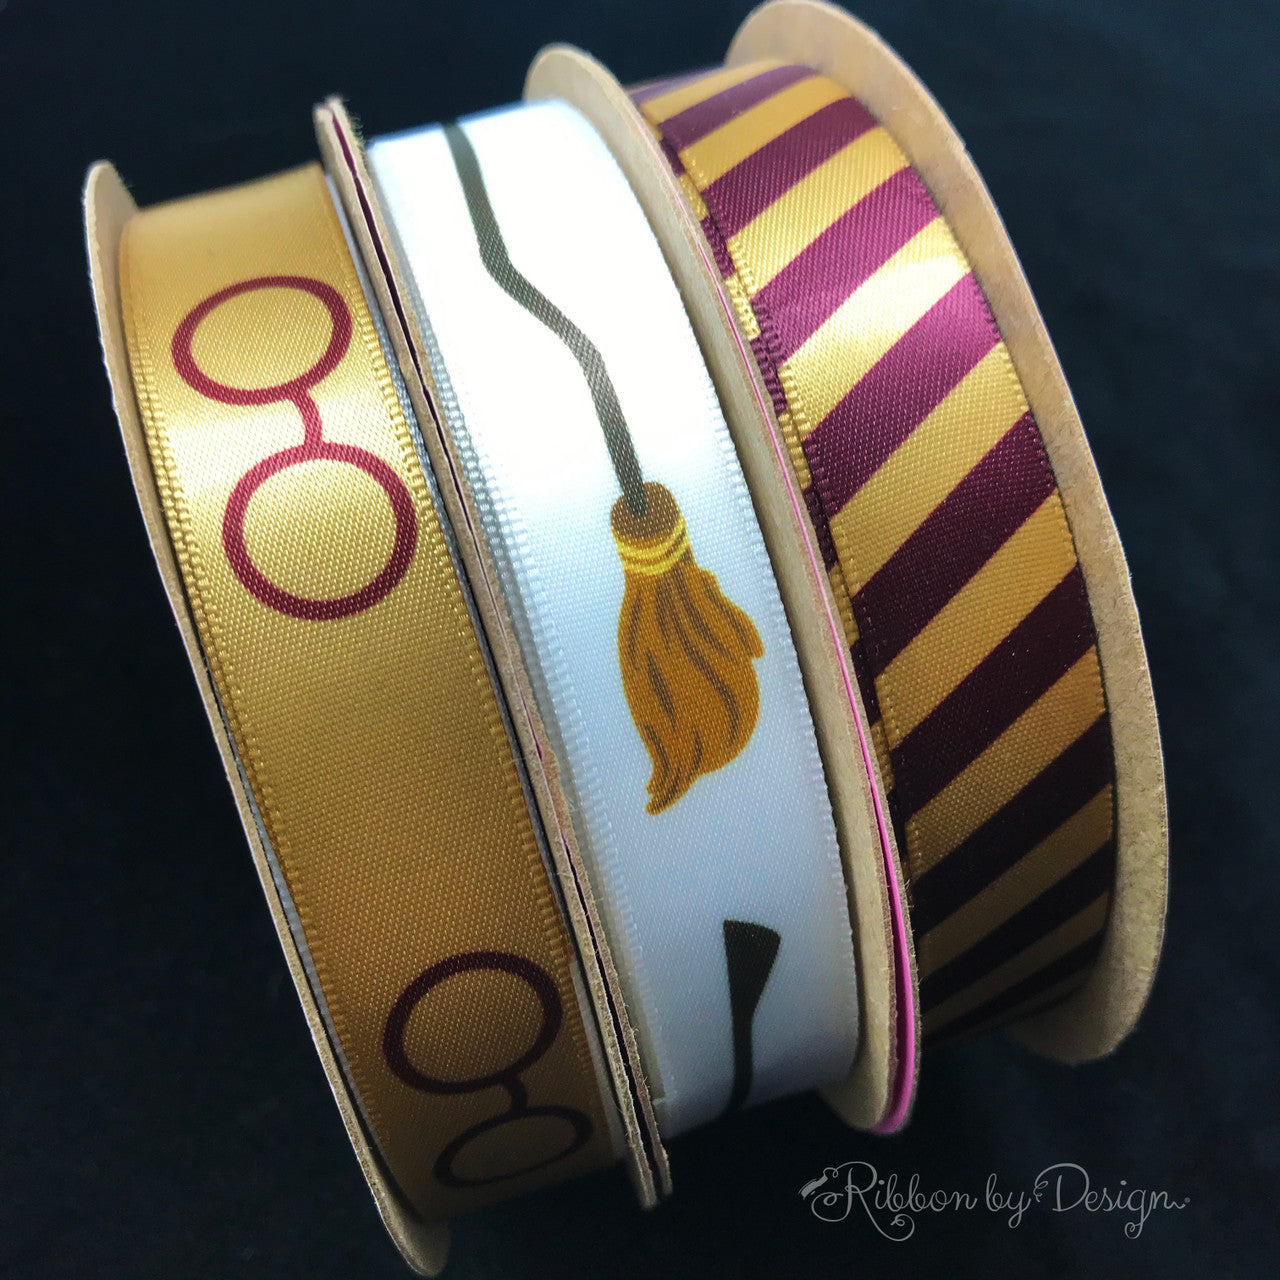 Mix and match our wizard  Brooms with our gold and burgundy stripes and spectacles for a complete HP experience! Our ribbons are designed and printed in the USA